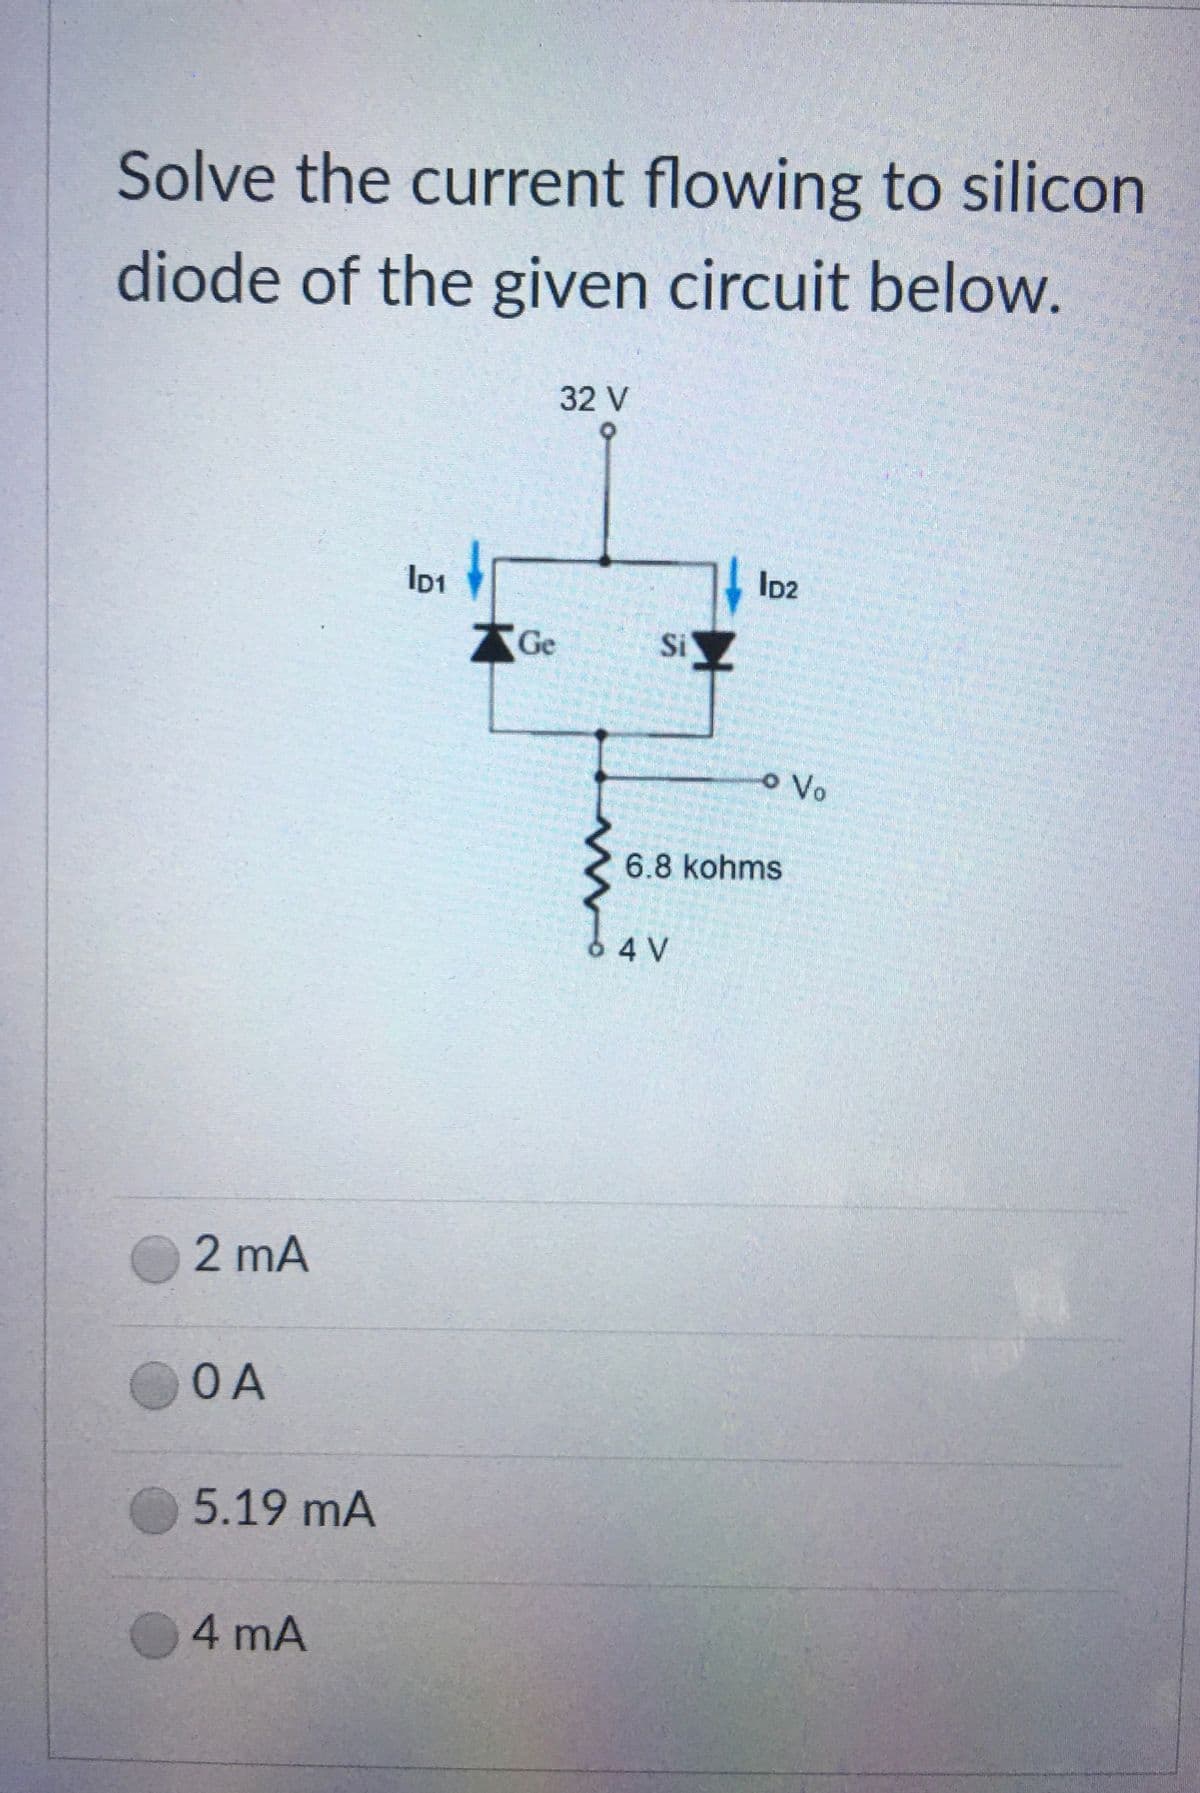 Solve the current flowing to silicon
diode of the given circuit below.
32 V
ID1
ID2
AGe
SiZ
o Vo
6.8 kohms
6 4 V
2 mA
OA
5.19 mA
4 mA
